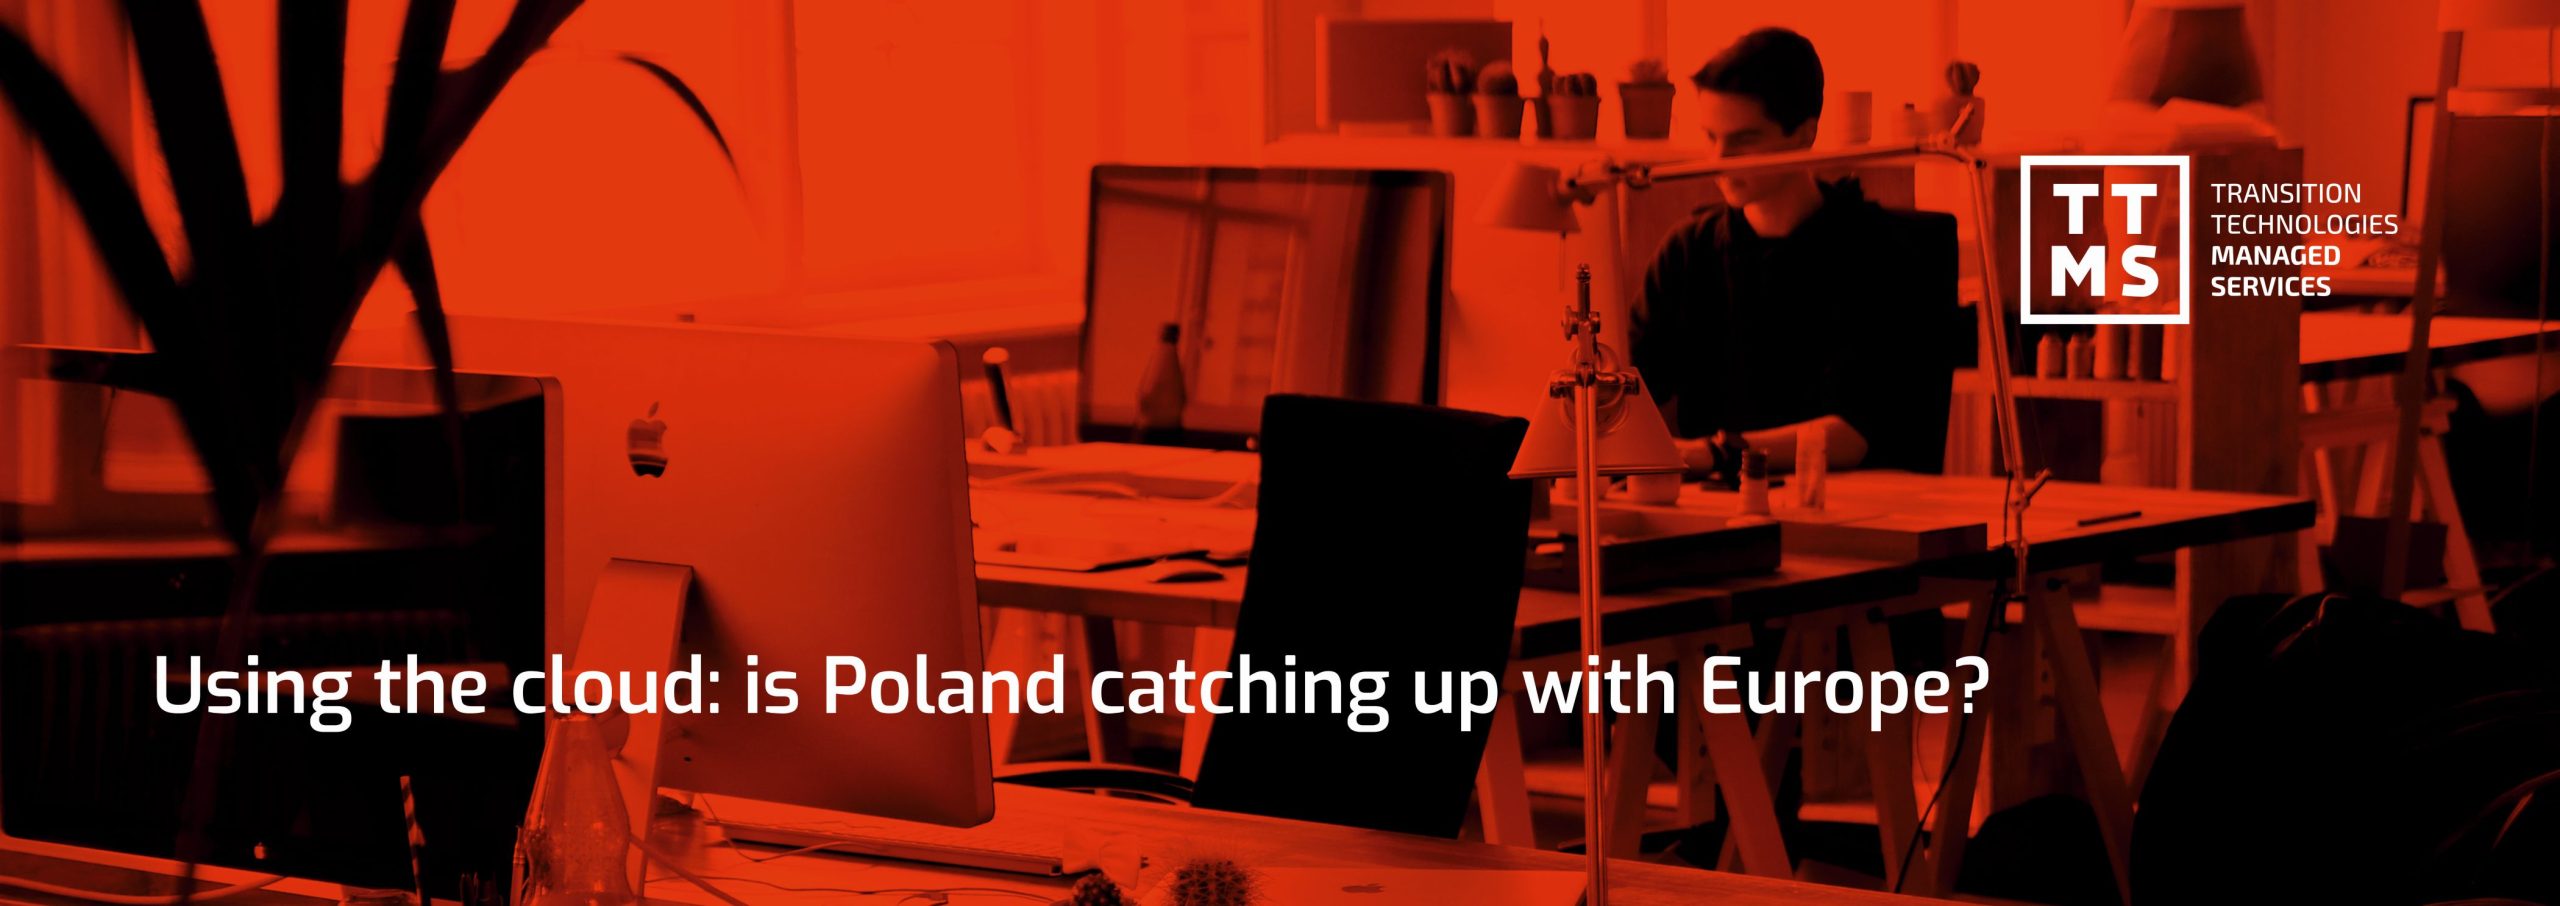 Using the cloud: is Poland catching up with Europe?